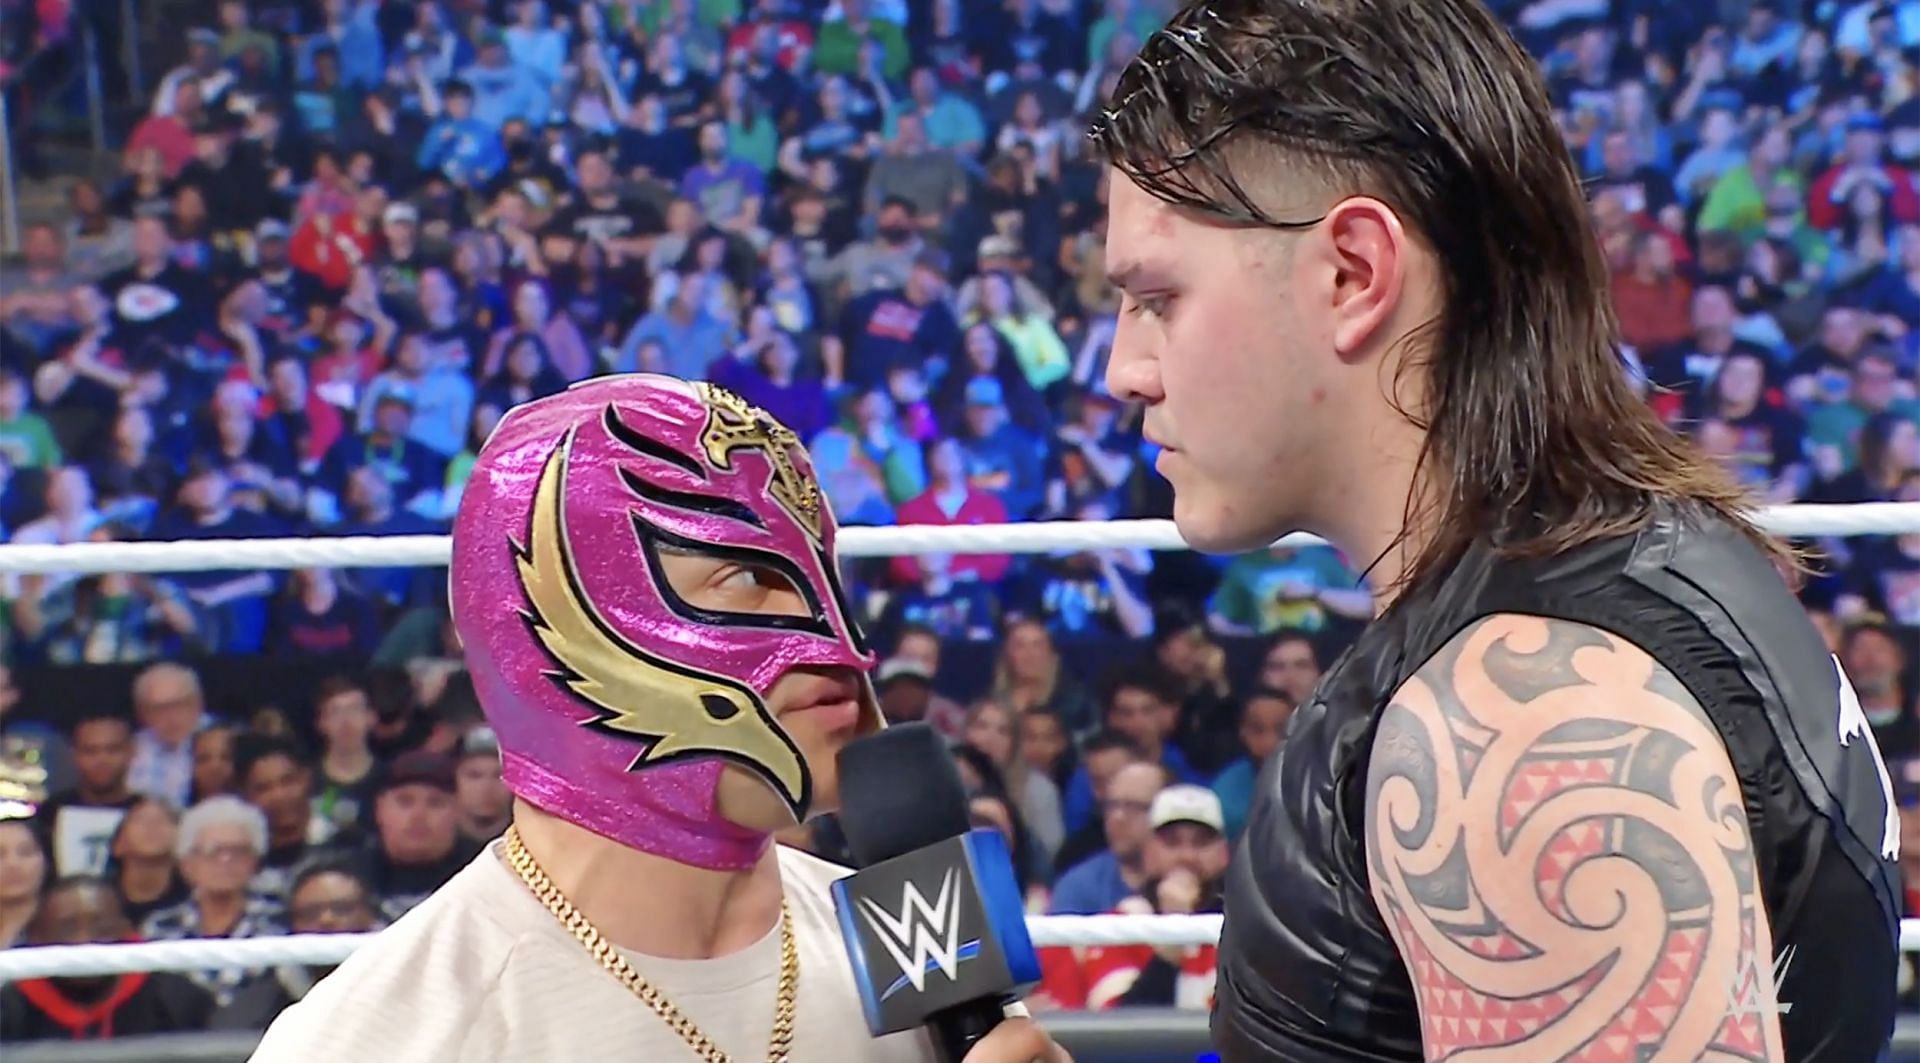 Rey Mysterio will collide with Dominik Mysterio at WrestleMania 39